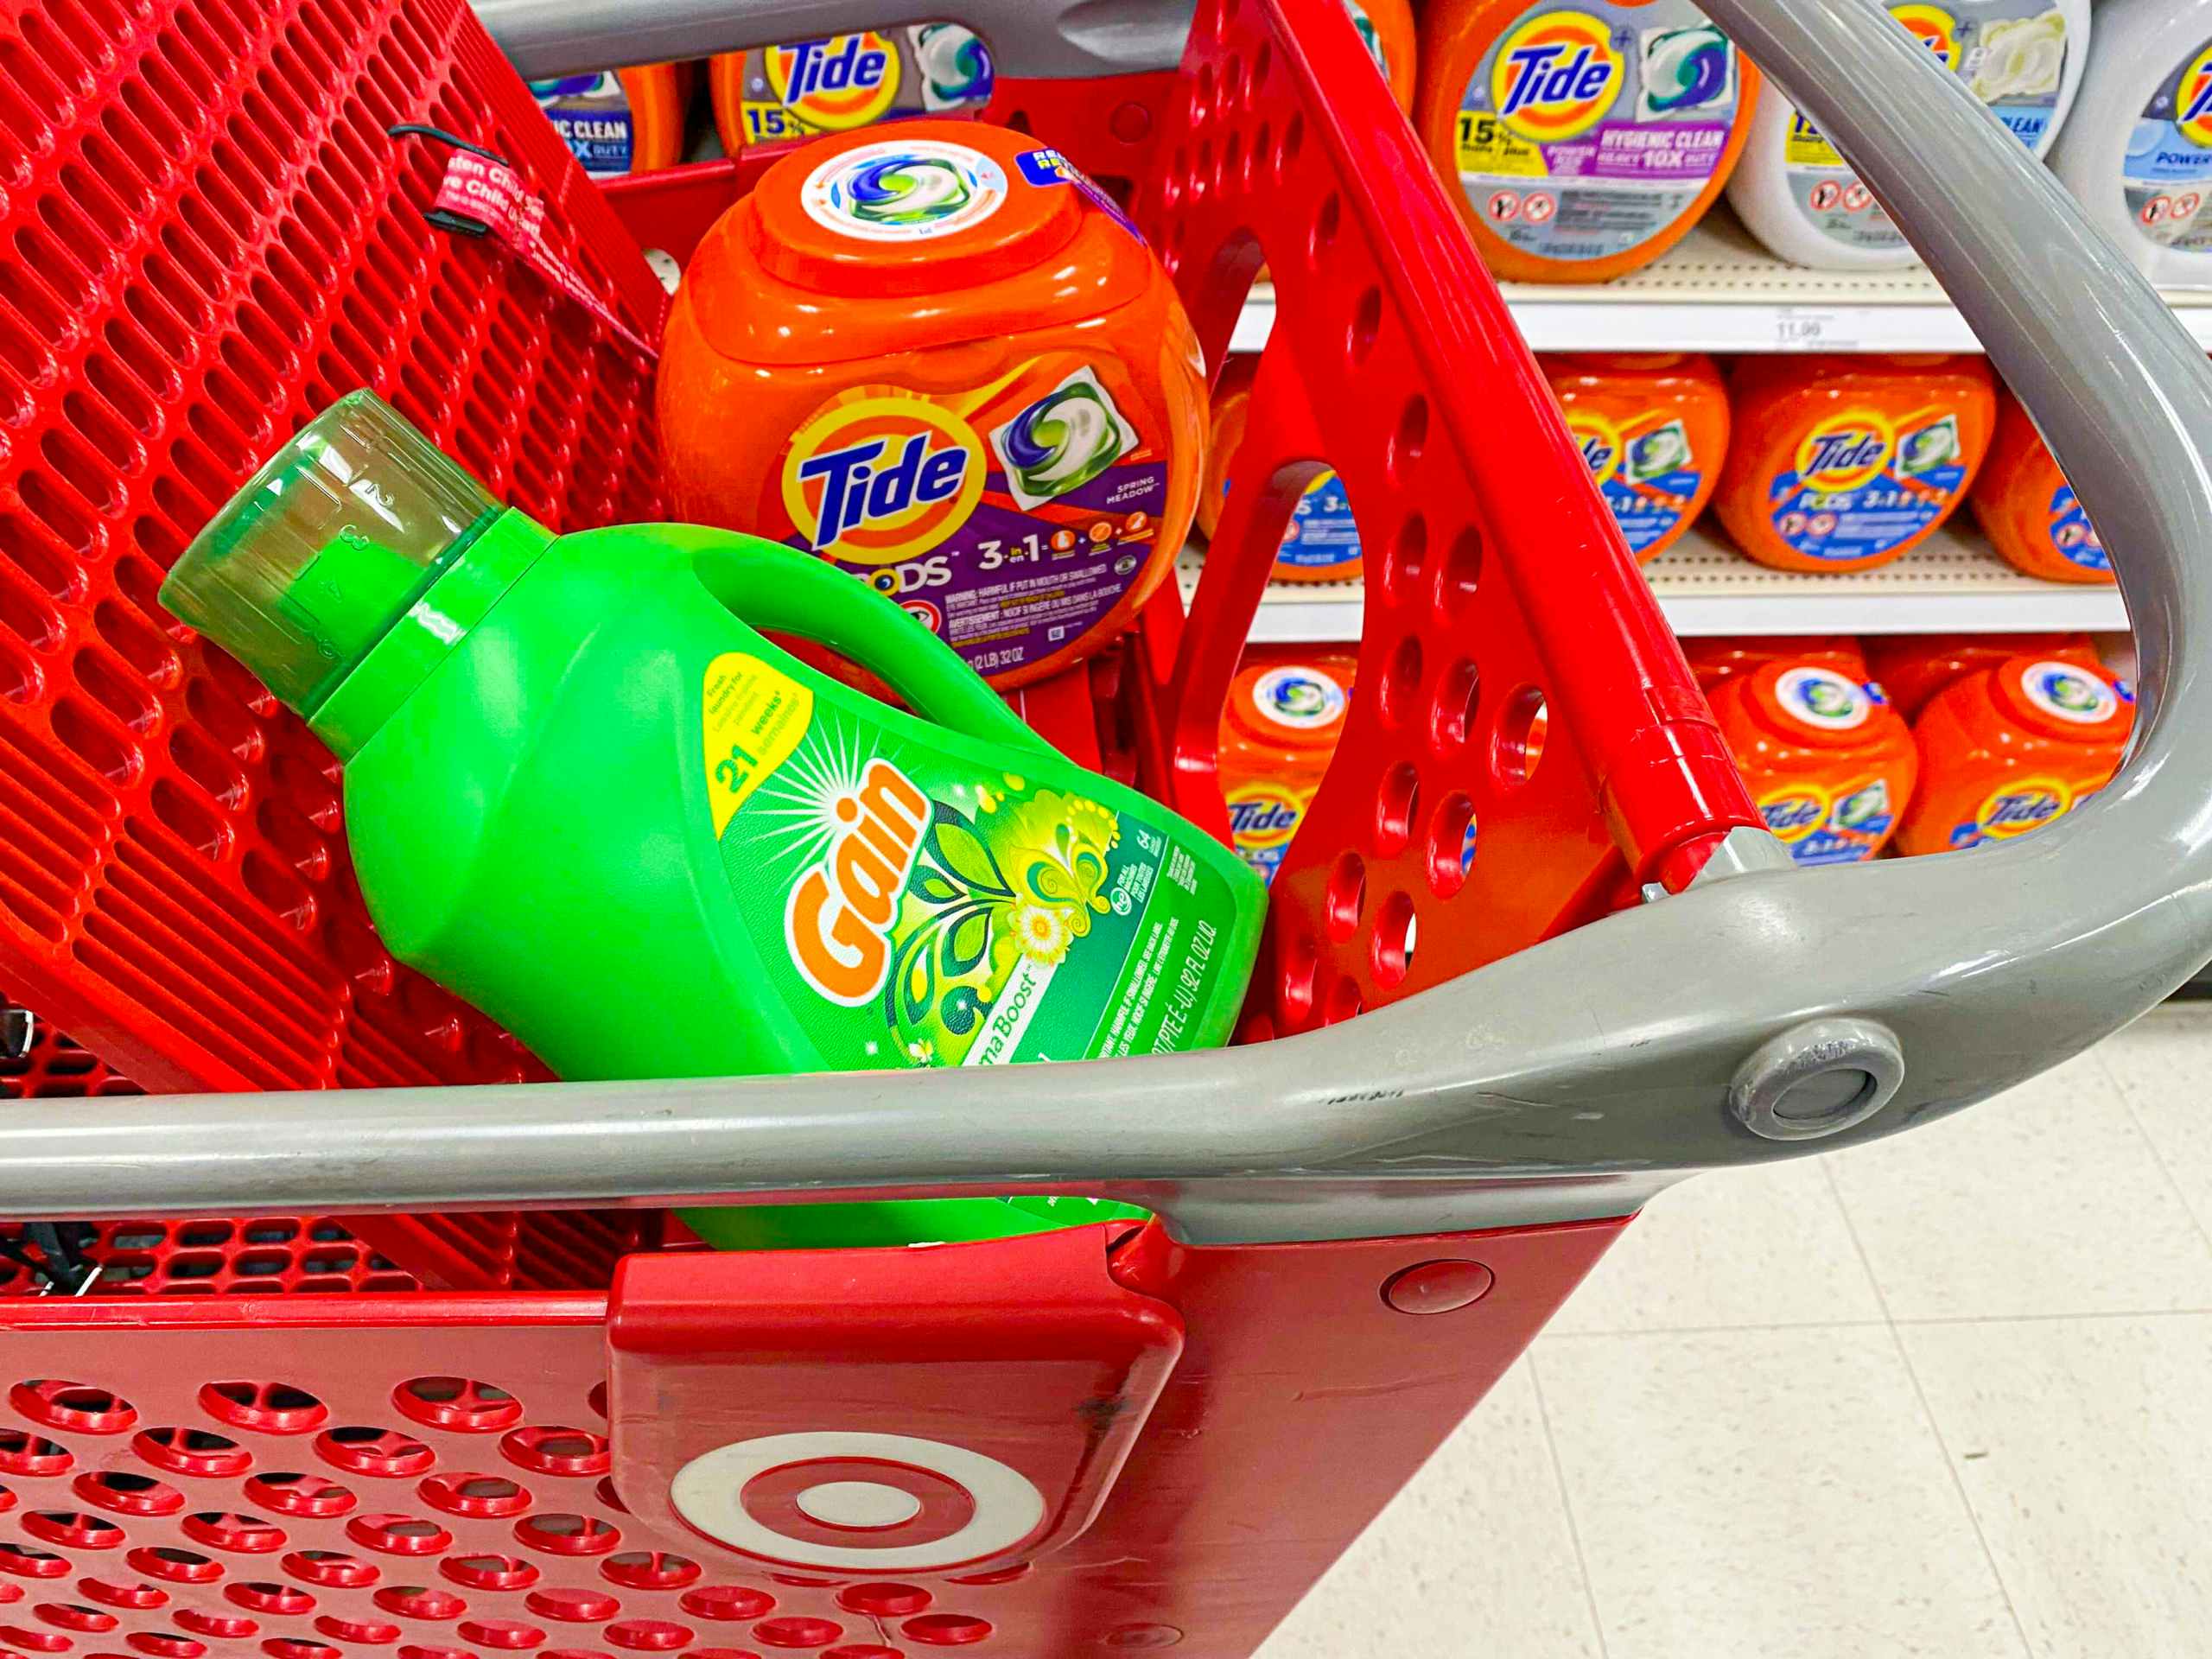 Gain and Tide laundry detergent in a store cart.